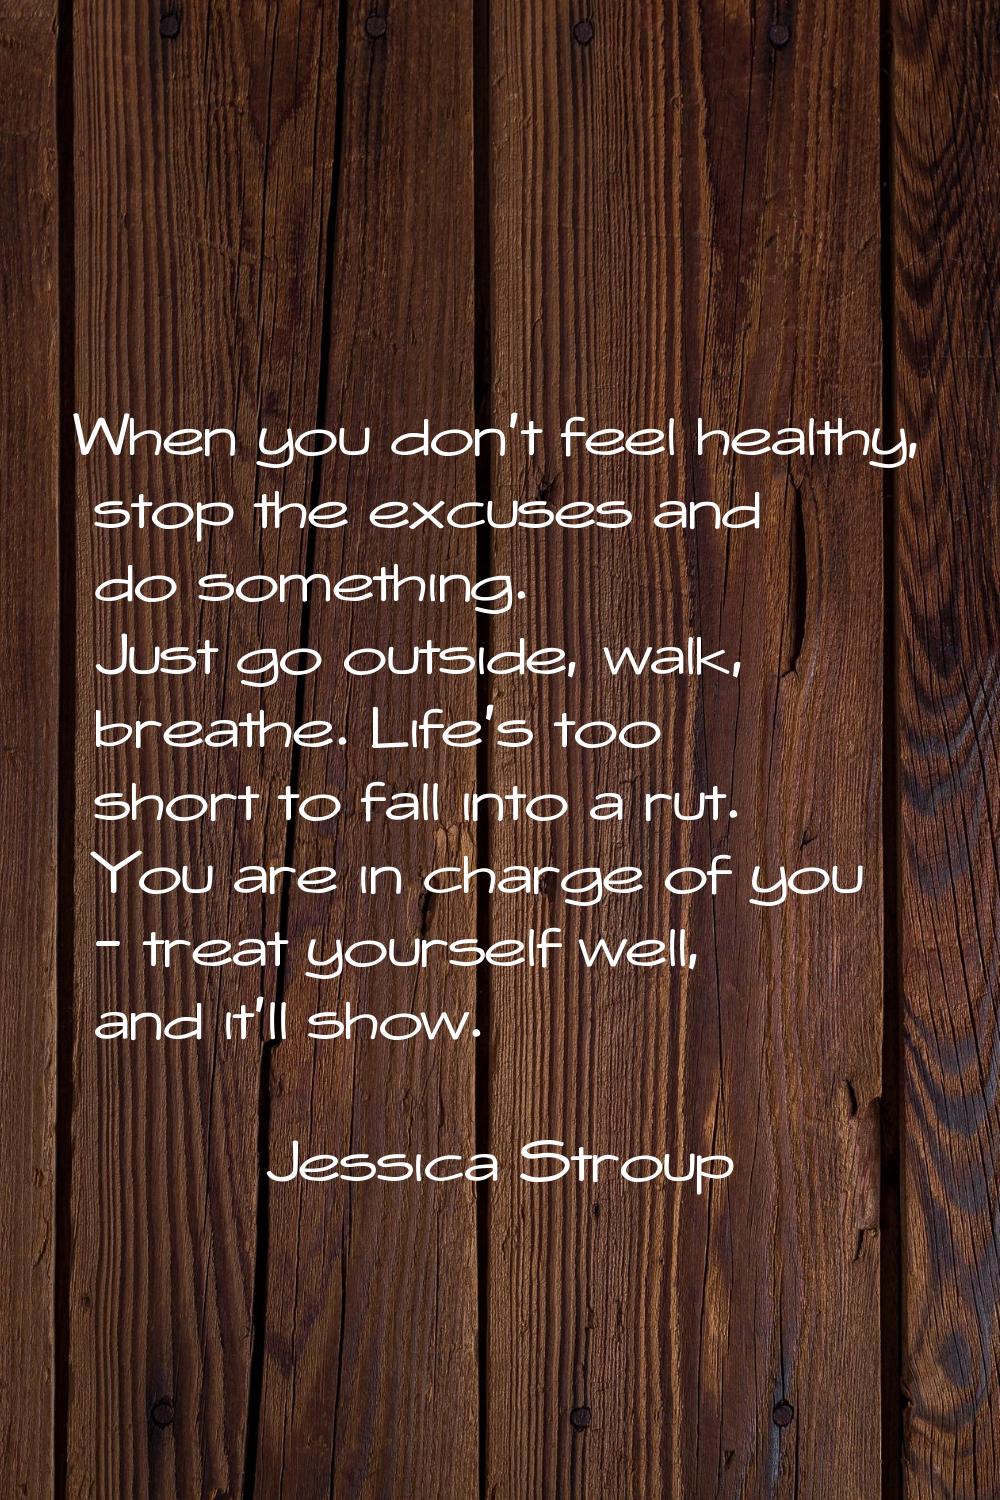 When you don't feel healthy, stop the excuses and do something. Just go outside, walk, breathe. Lif